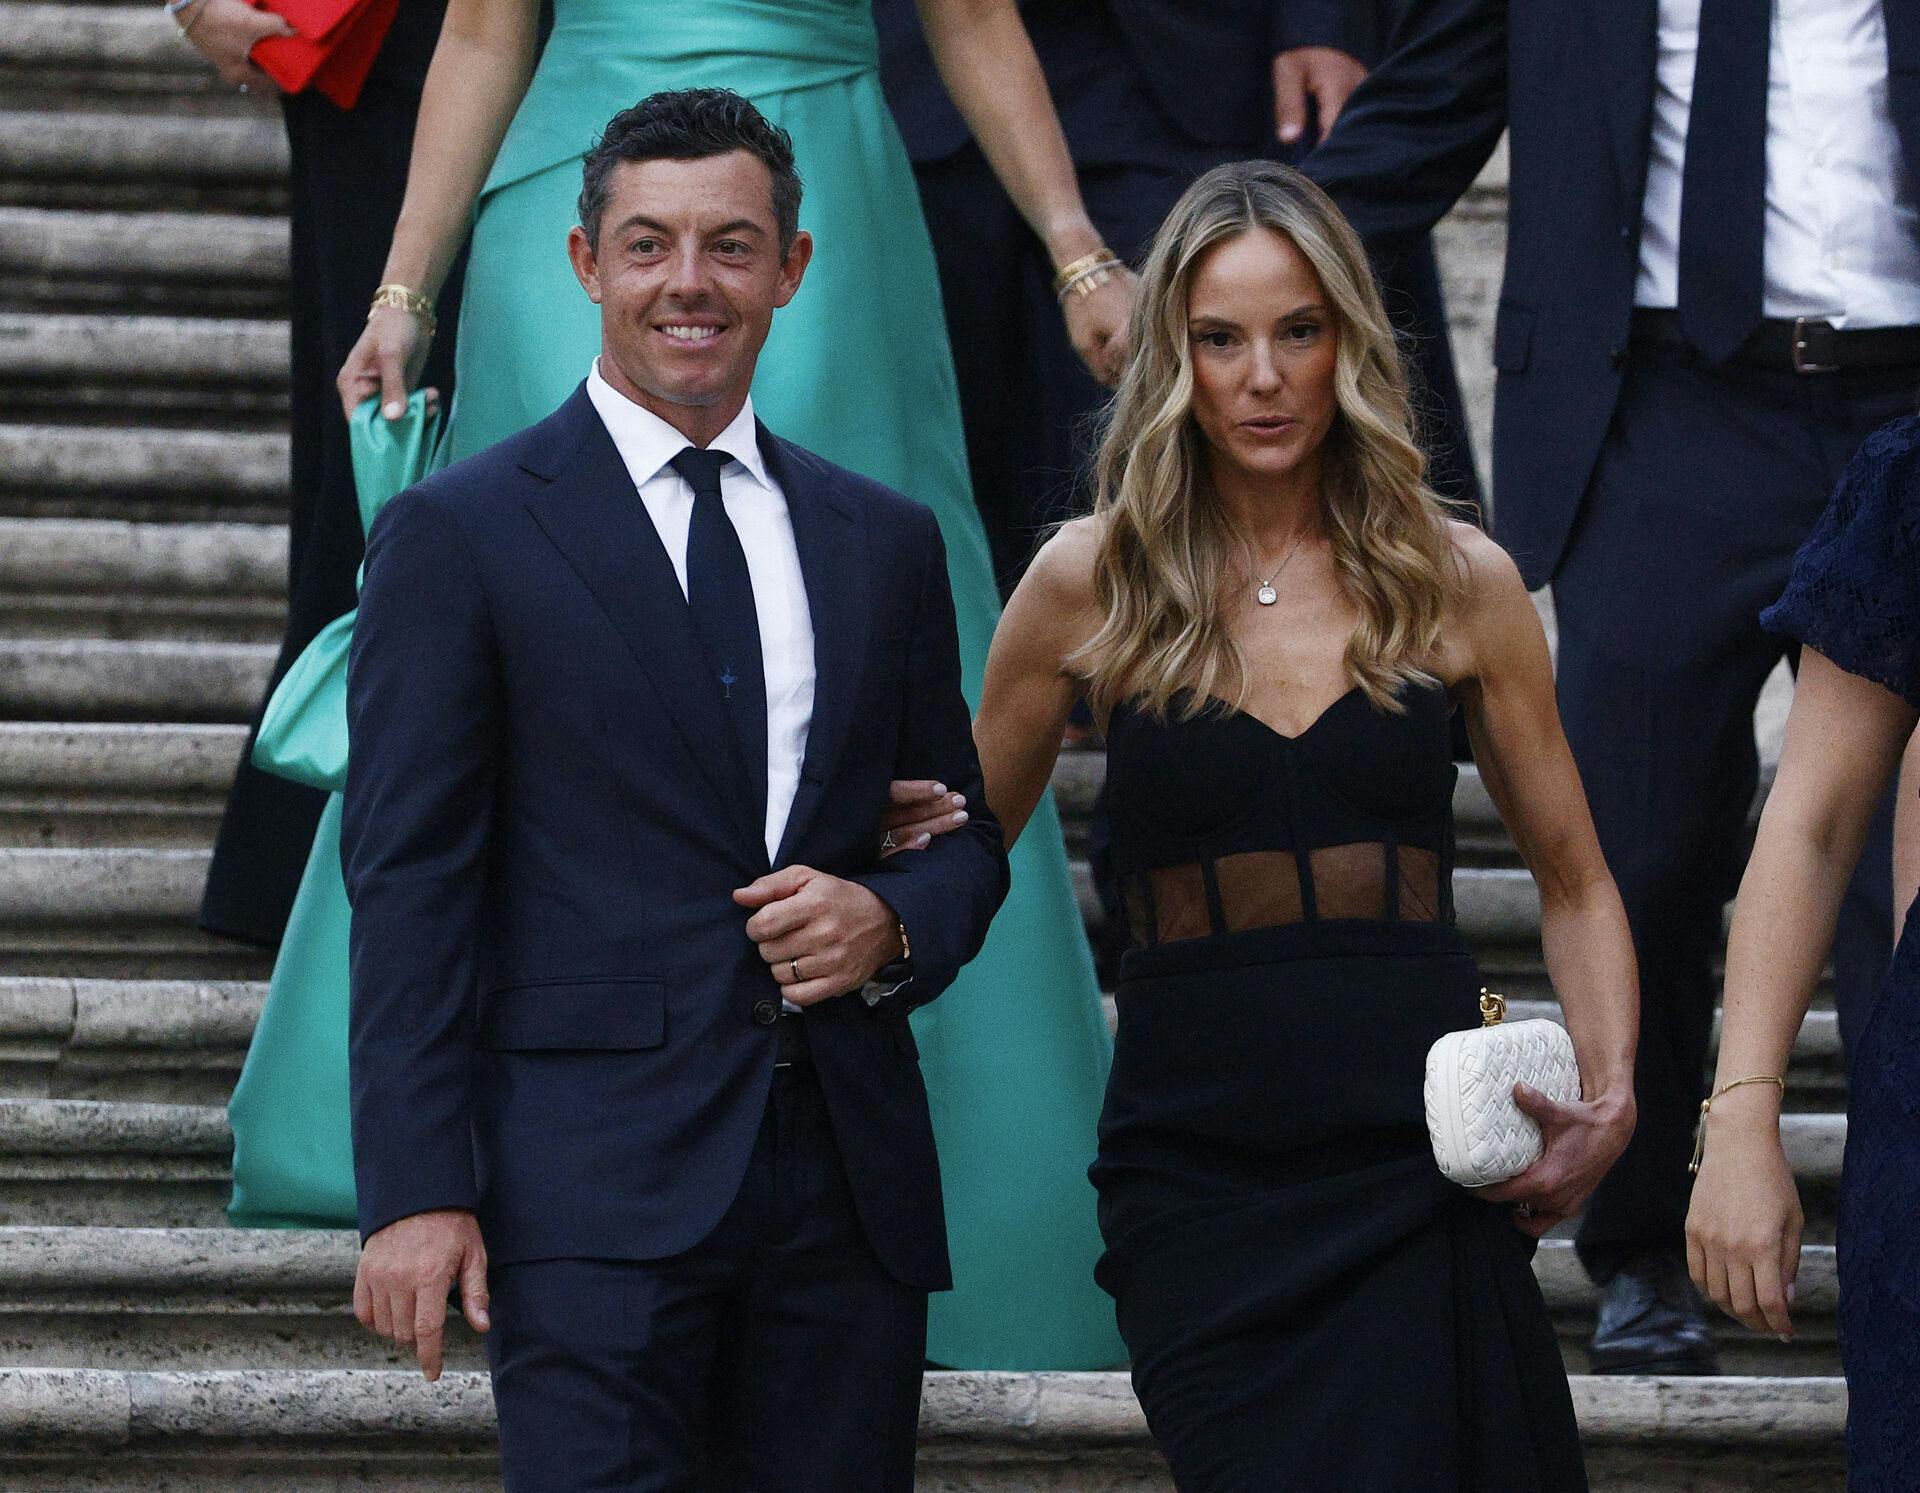 Golf - The 2023 Ryder Cup - Rome, Italy - September 27, 2023 Team Europe's Rory McIlroy and his wife Erica Stoll are pictured on the Spanish steps and stairs at Piazza di Spagna in Rome REUTERS/Guglielmo Mangiapane